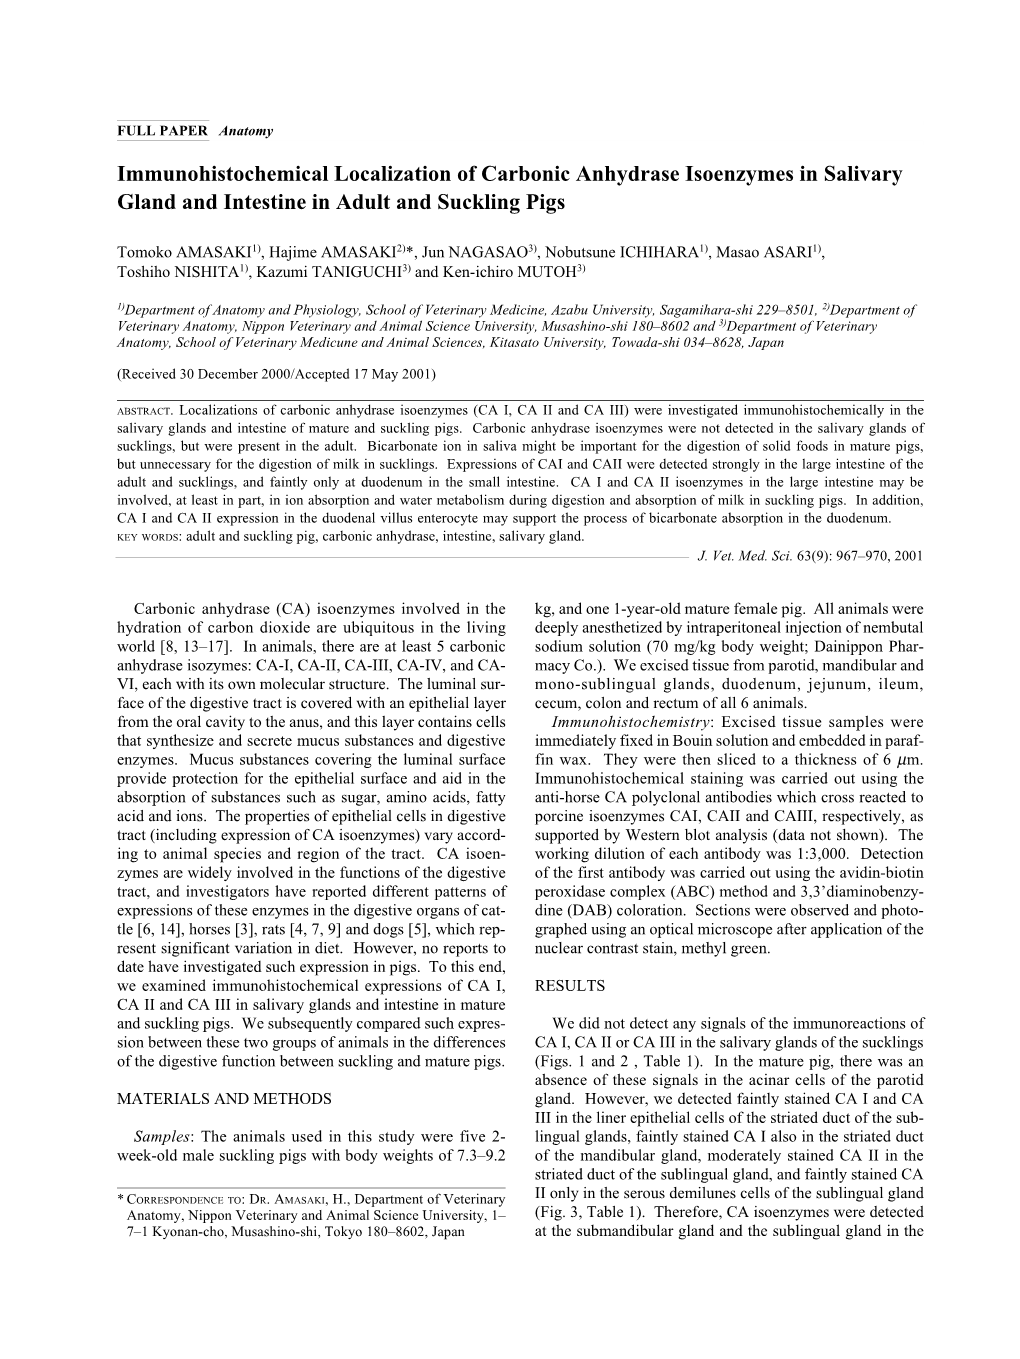 Immunohistochemical Localization of Carbonic Anhydrase Isoenzymes in Salivary Gland and Intestine in Adult and Suckling Pigs